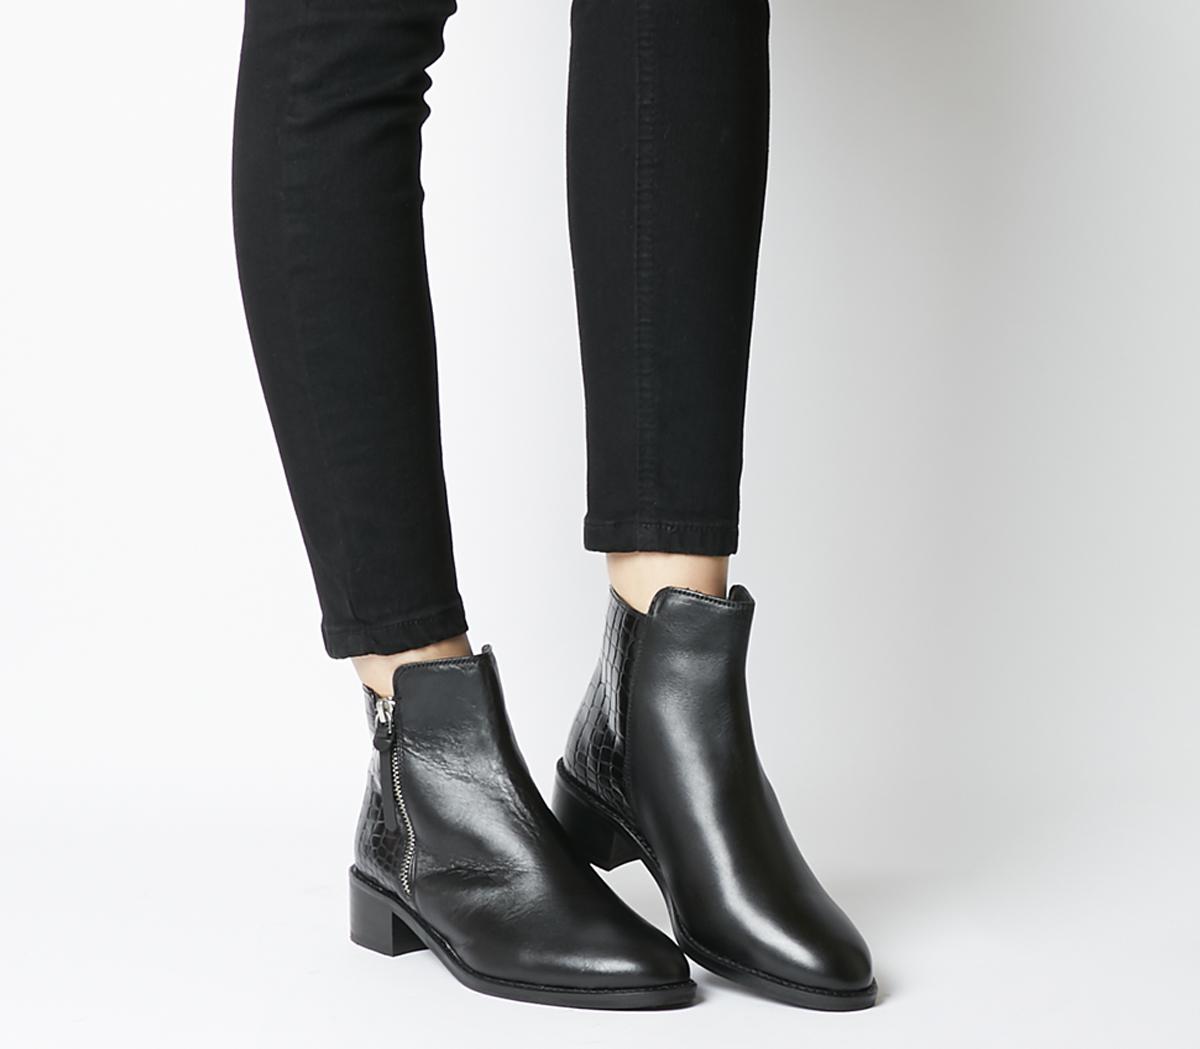 office ashleigh black leather calf croc boots